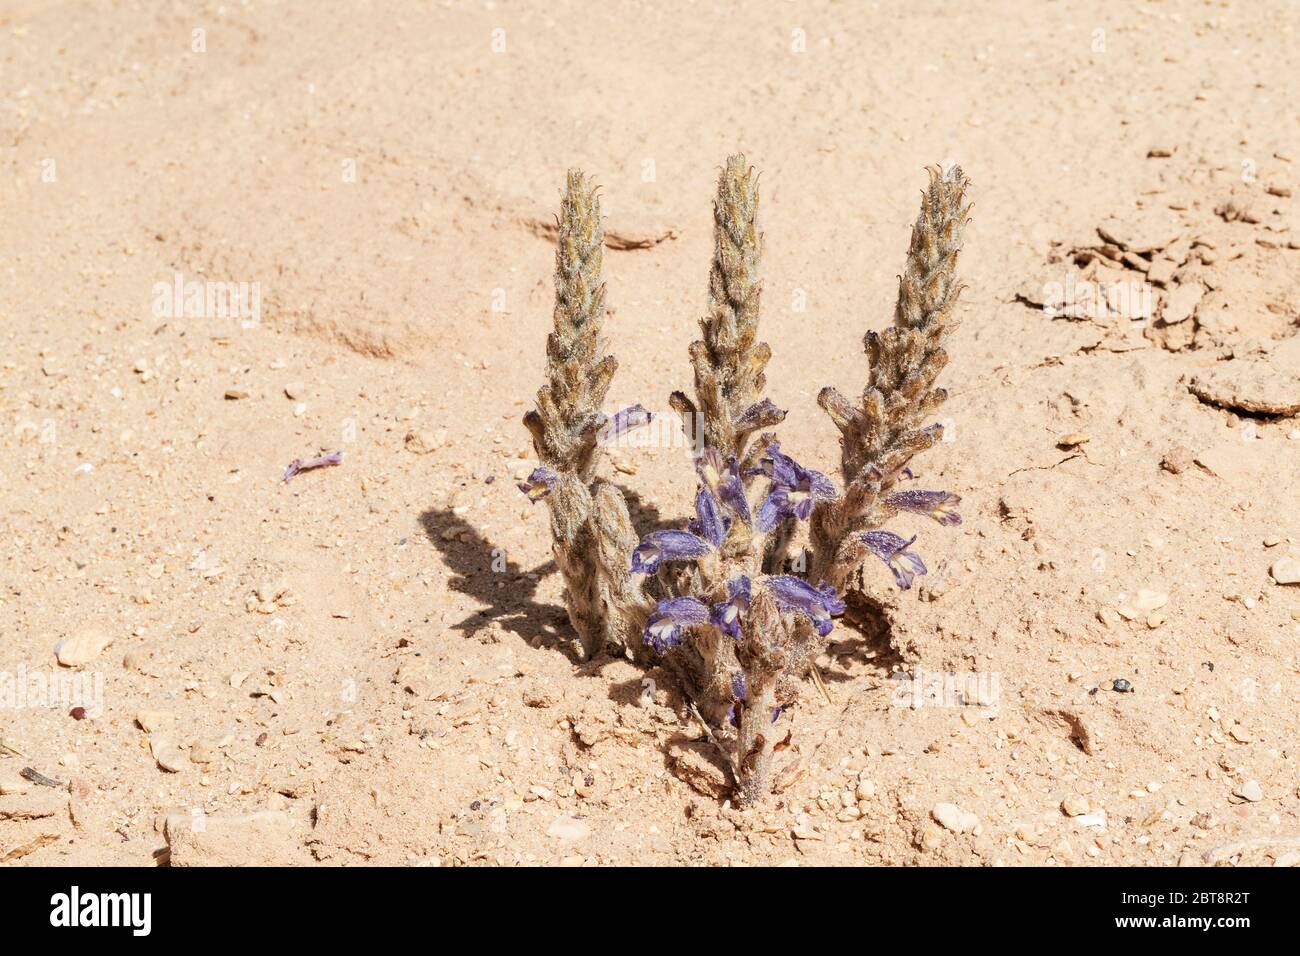 blooming Orobanche mutelii Mutel's Broomrape is a parasitic plant growing on the roots of nearby plants in the negev desert in Israel Stock Photo